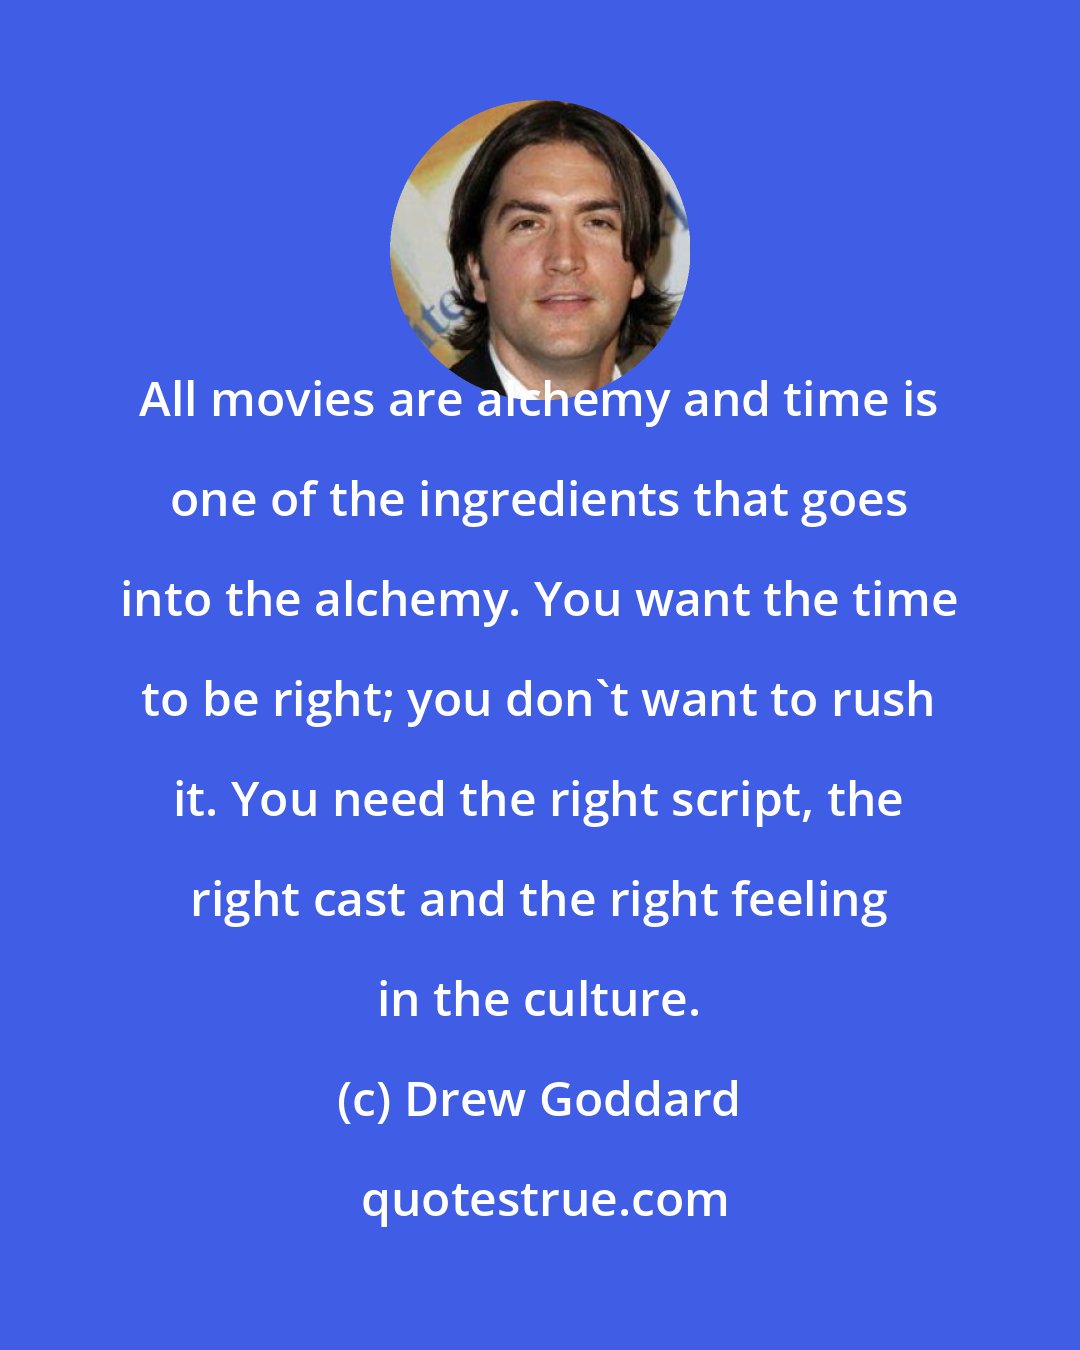 Drew Goddard: All movies are alchemy and time is one of the ingredients that goes into the alchemy. You want the time to be right; you don't want to rush it. You need the right script, the right cast and the right feeling in the culture.